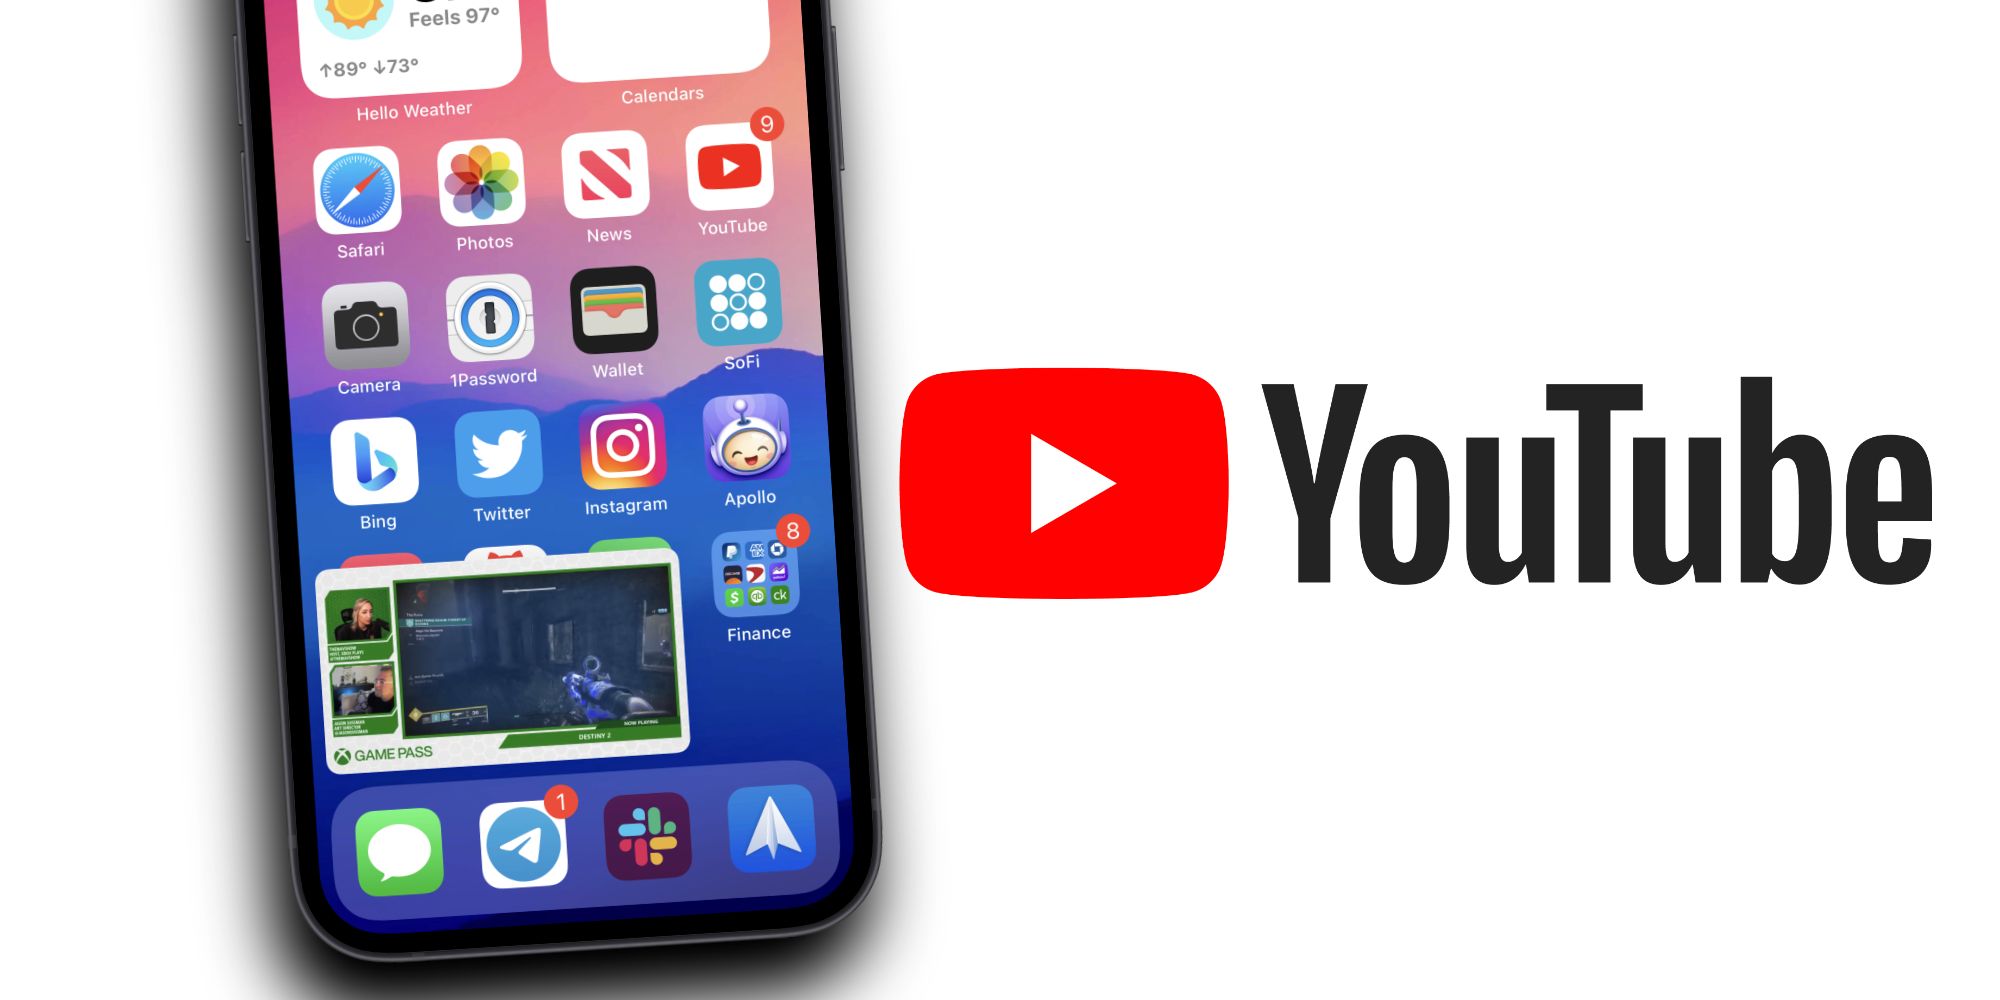 iOS picture-in-picture with the YouTube logo